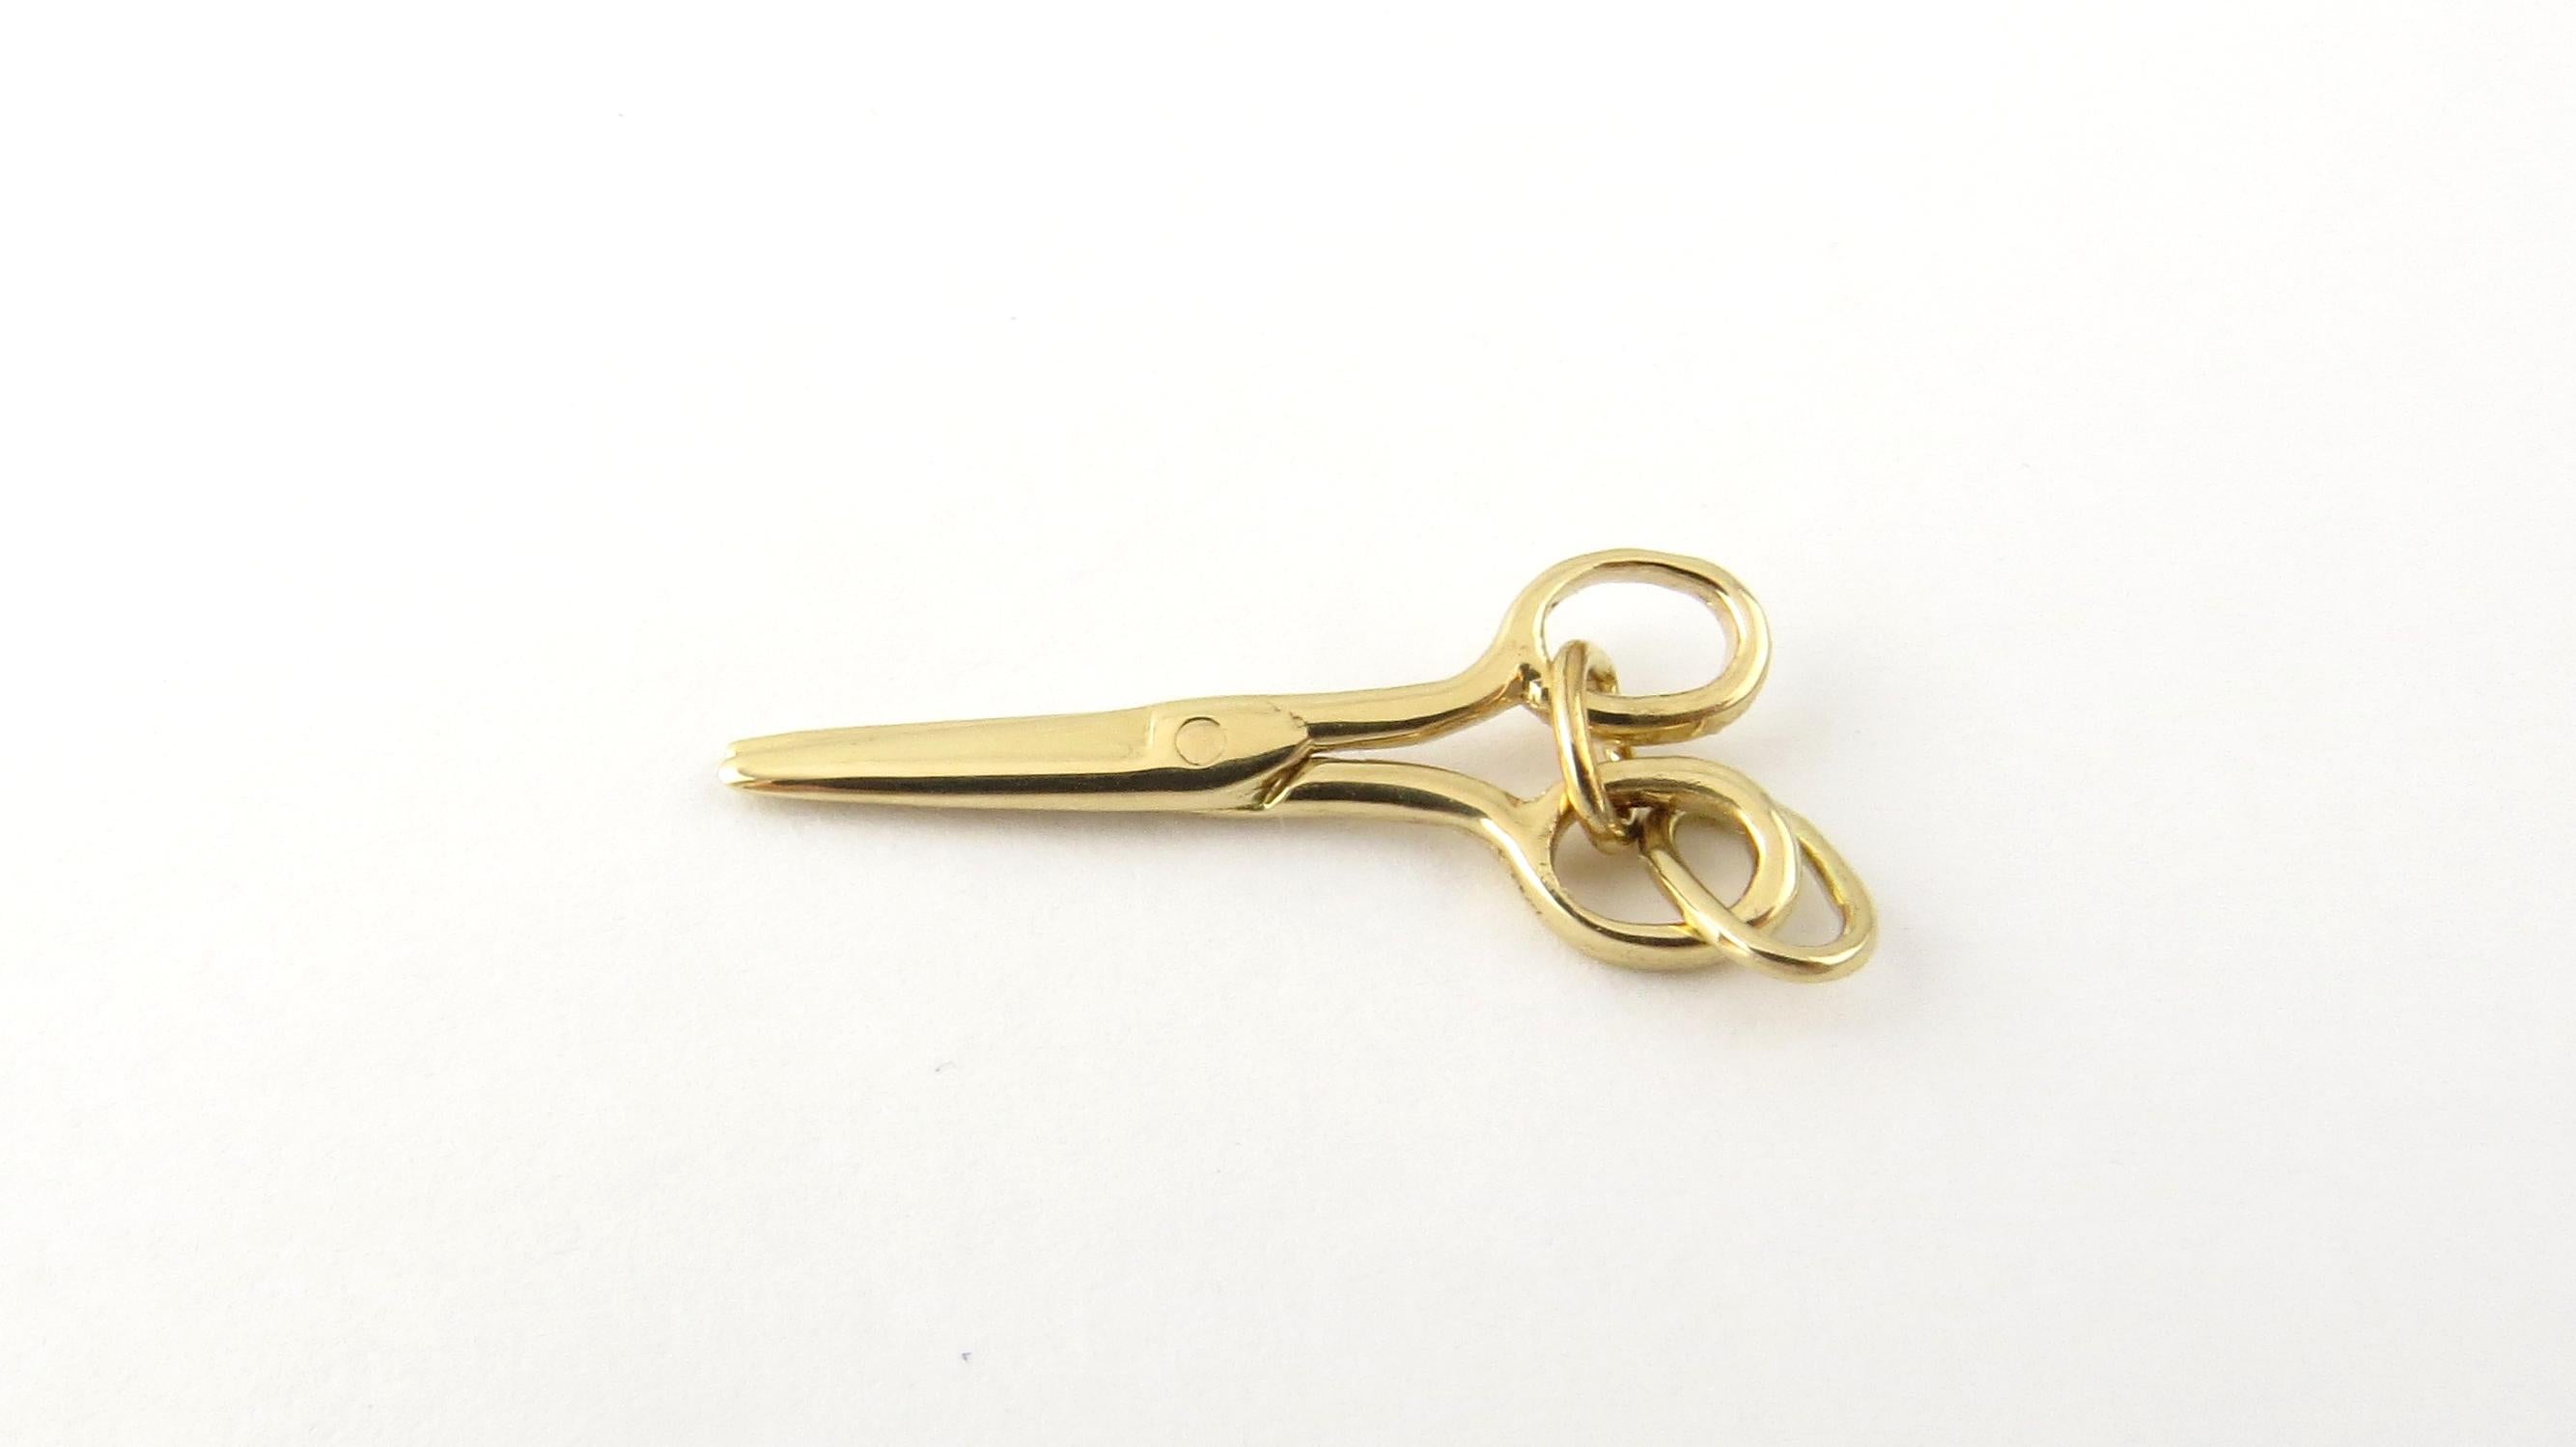 Vintage 14 Karat Yellow Gold Scissors Charm

This lovely charm features a miniature pair of scissors beautifully detailed in 14K yellow gold.

Size: 25 mm x 11 mm

Weight: 0.6 dwt. / 1.0 gr.

Stamped: 14K

Very good condition, professionally